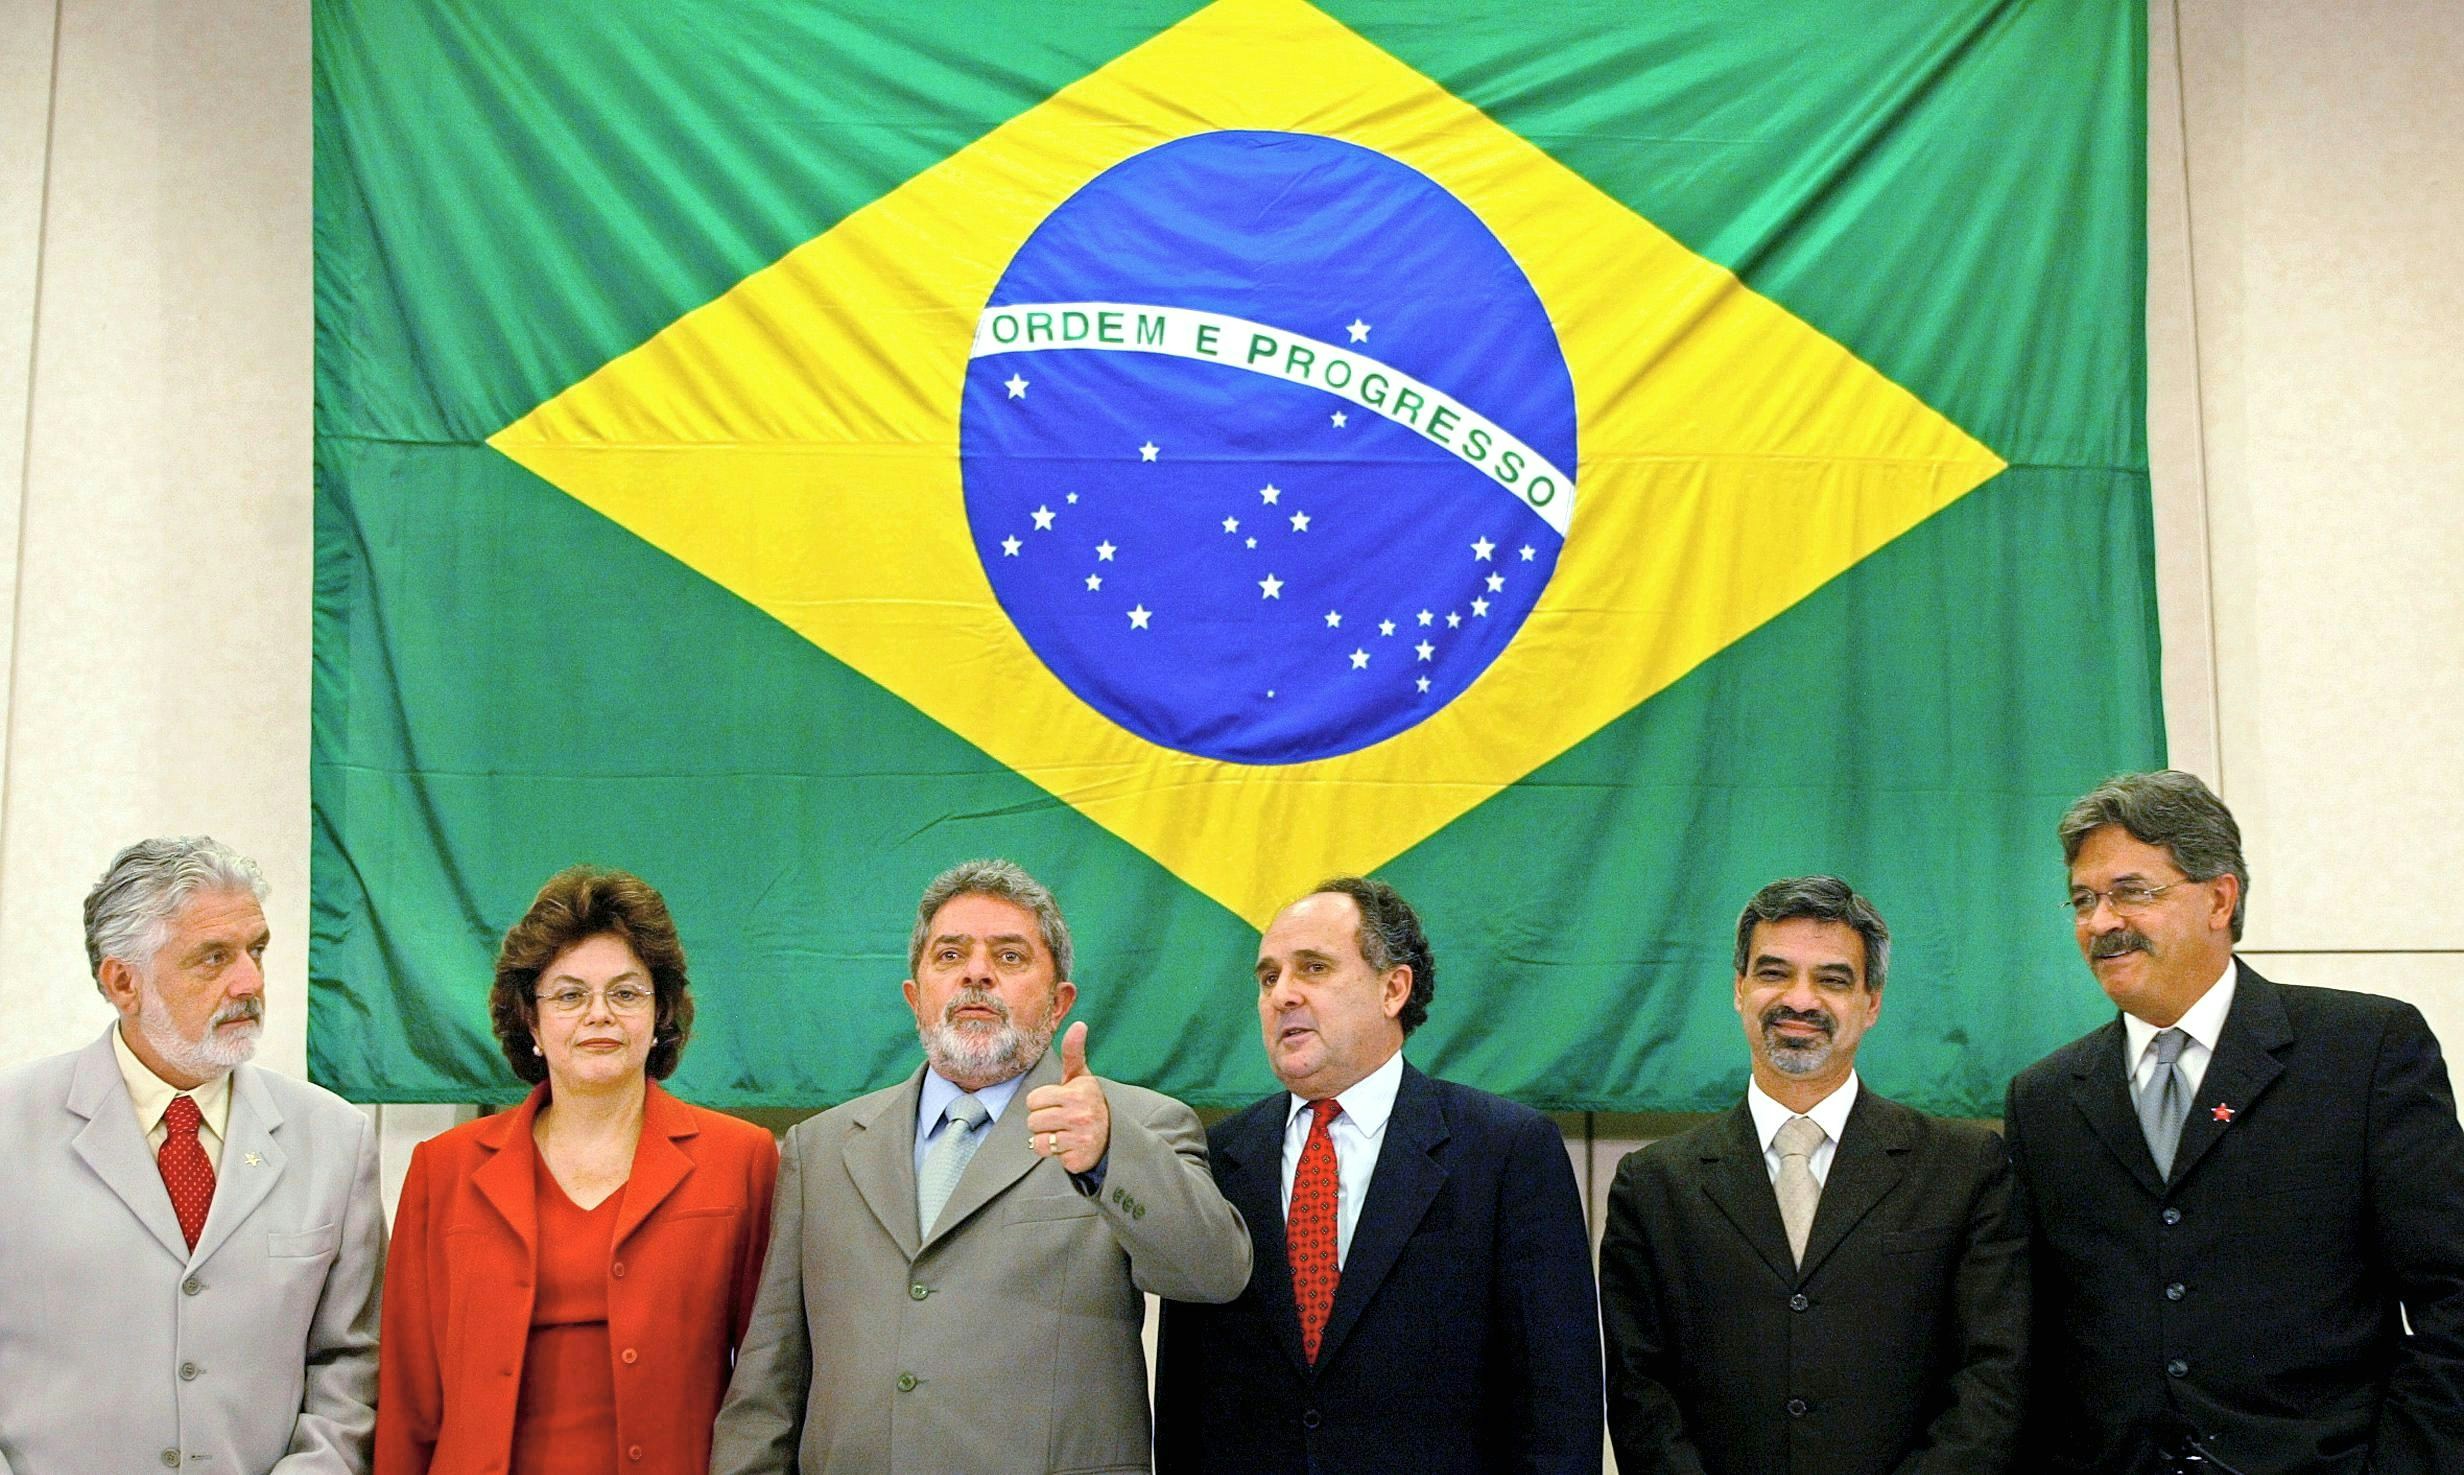 Luiz Inacio Lula da Silva (3rd L), president-elect of Brazil, gives the thumbs-up 20 December, 2002 in Sao Paulo, Brazil, as he presents his ministers (from L-R): Minister of work Jacques Wagner, Energy minister Dilma Rousseff, Education minister Cristovao Buarque, Health minister Humberto Costa and national secretary of Human Rights Nilmario Miranda. AFP PHOTO/Mauricio LIMA (Photo credit should read MAURICIO LIMA/AFP via Getty Images)